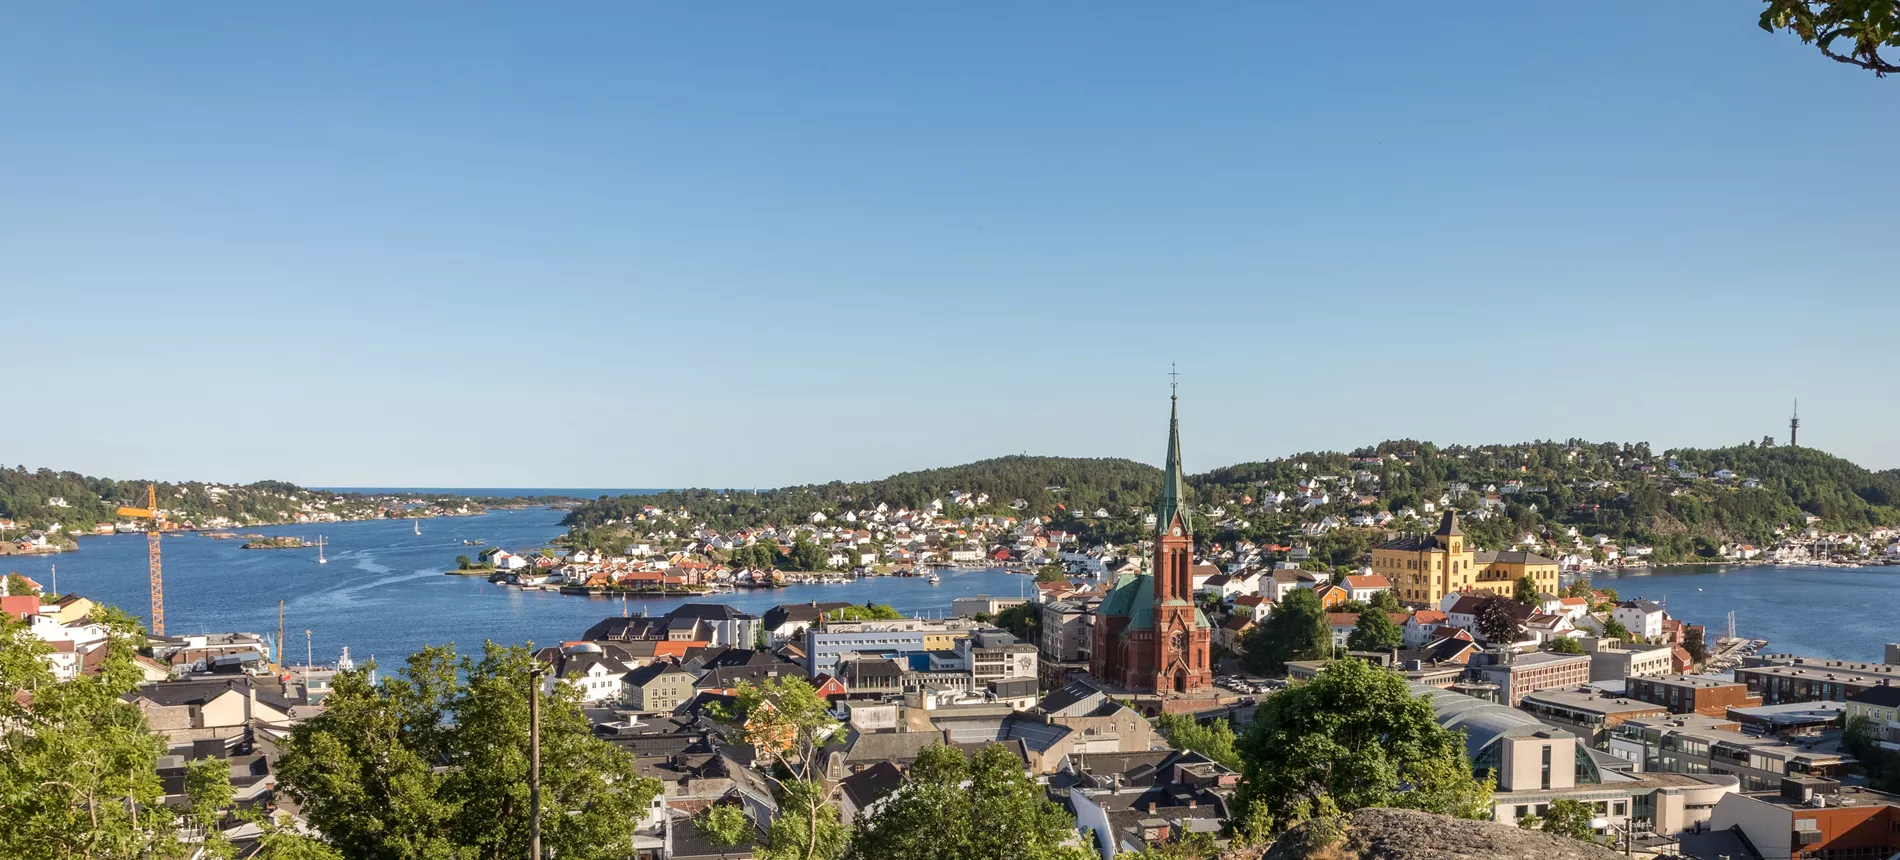 Arendal by